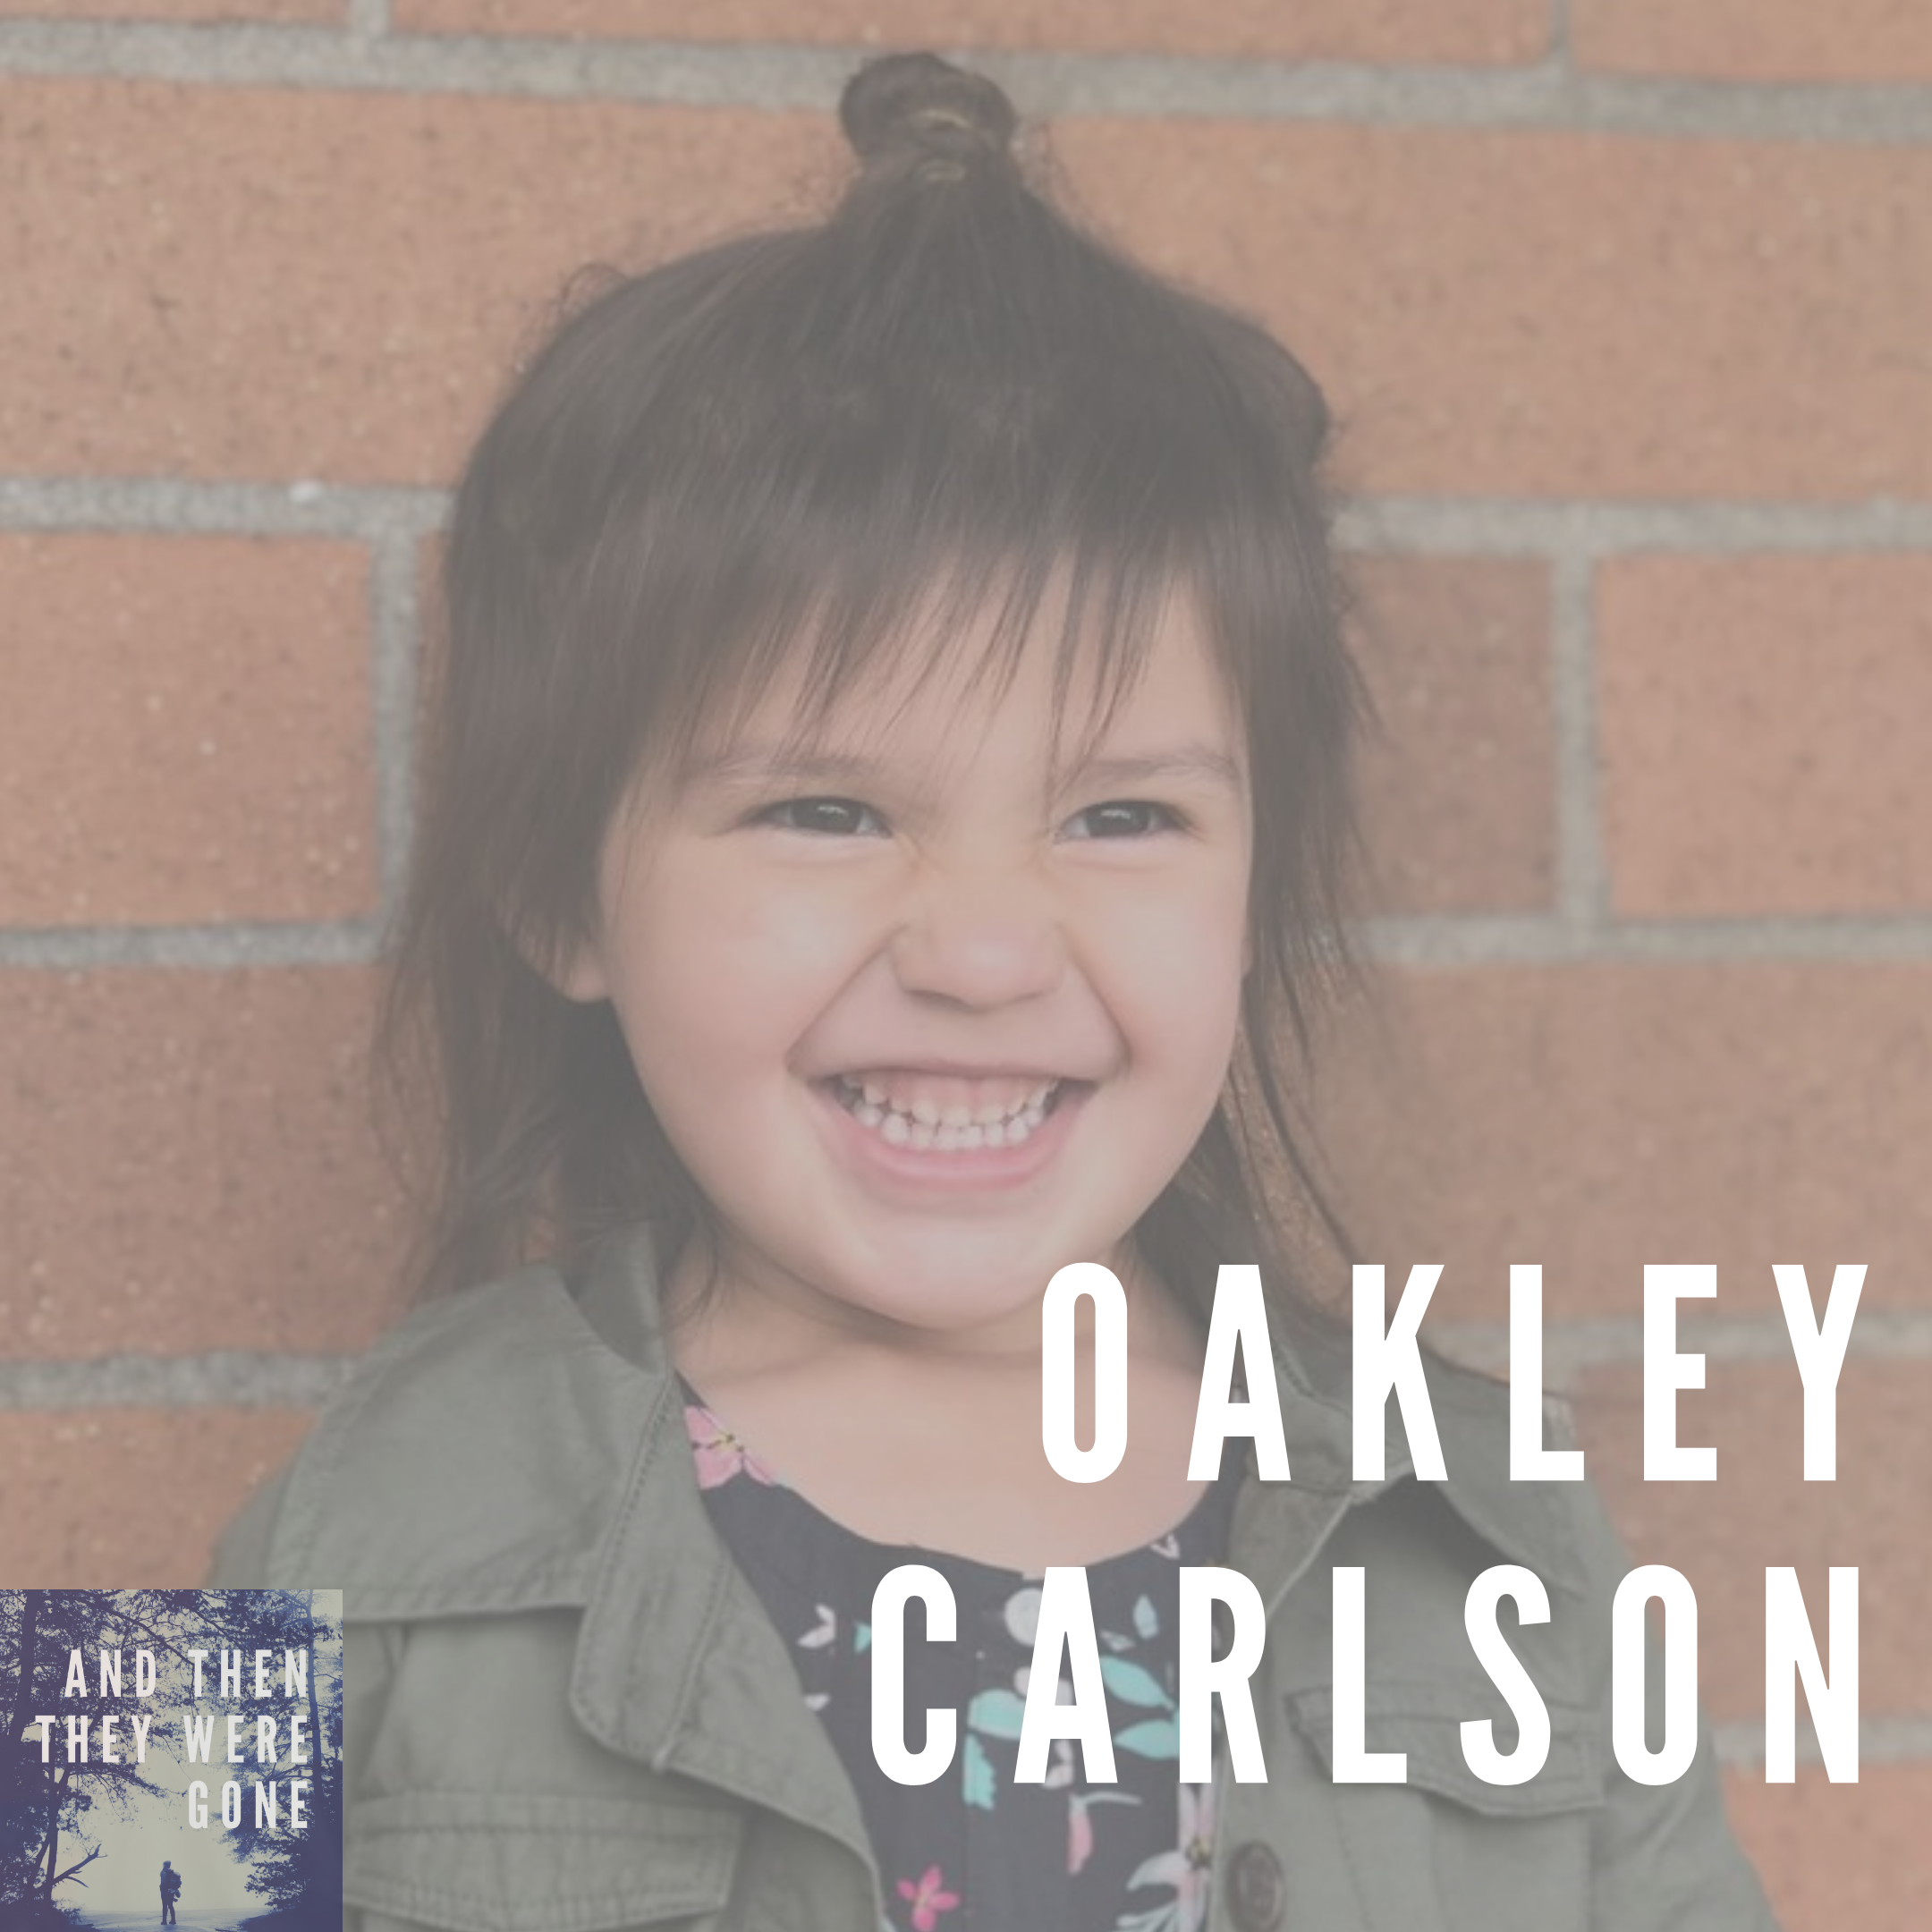 Oakley Carlson — And Then They Were Gone